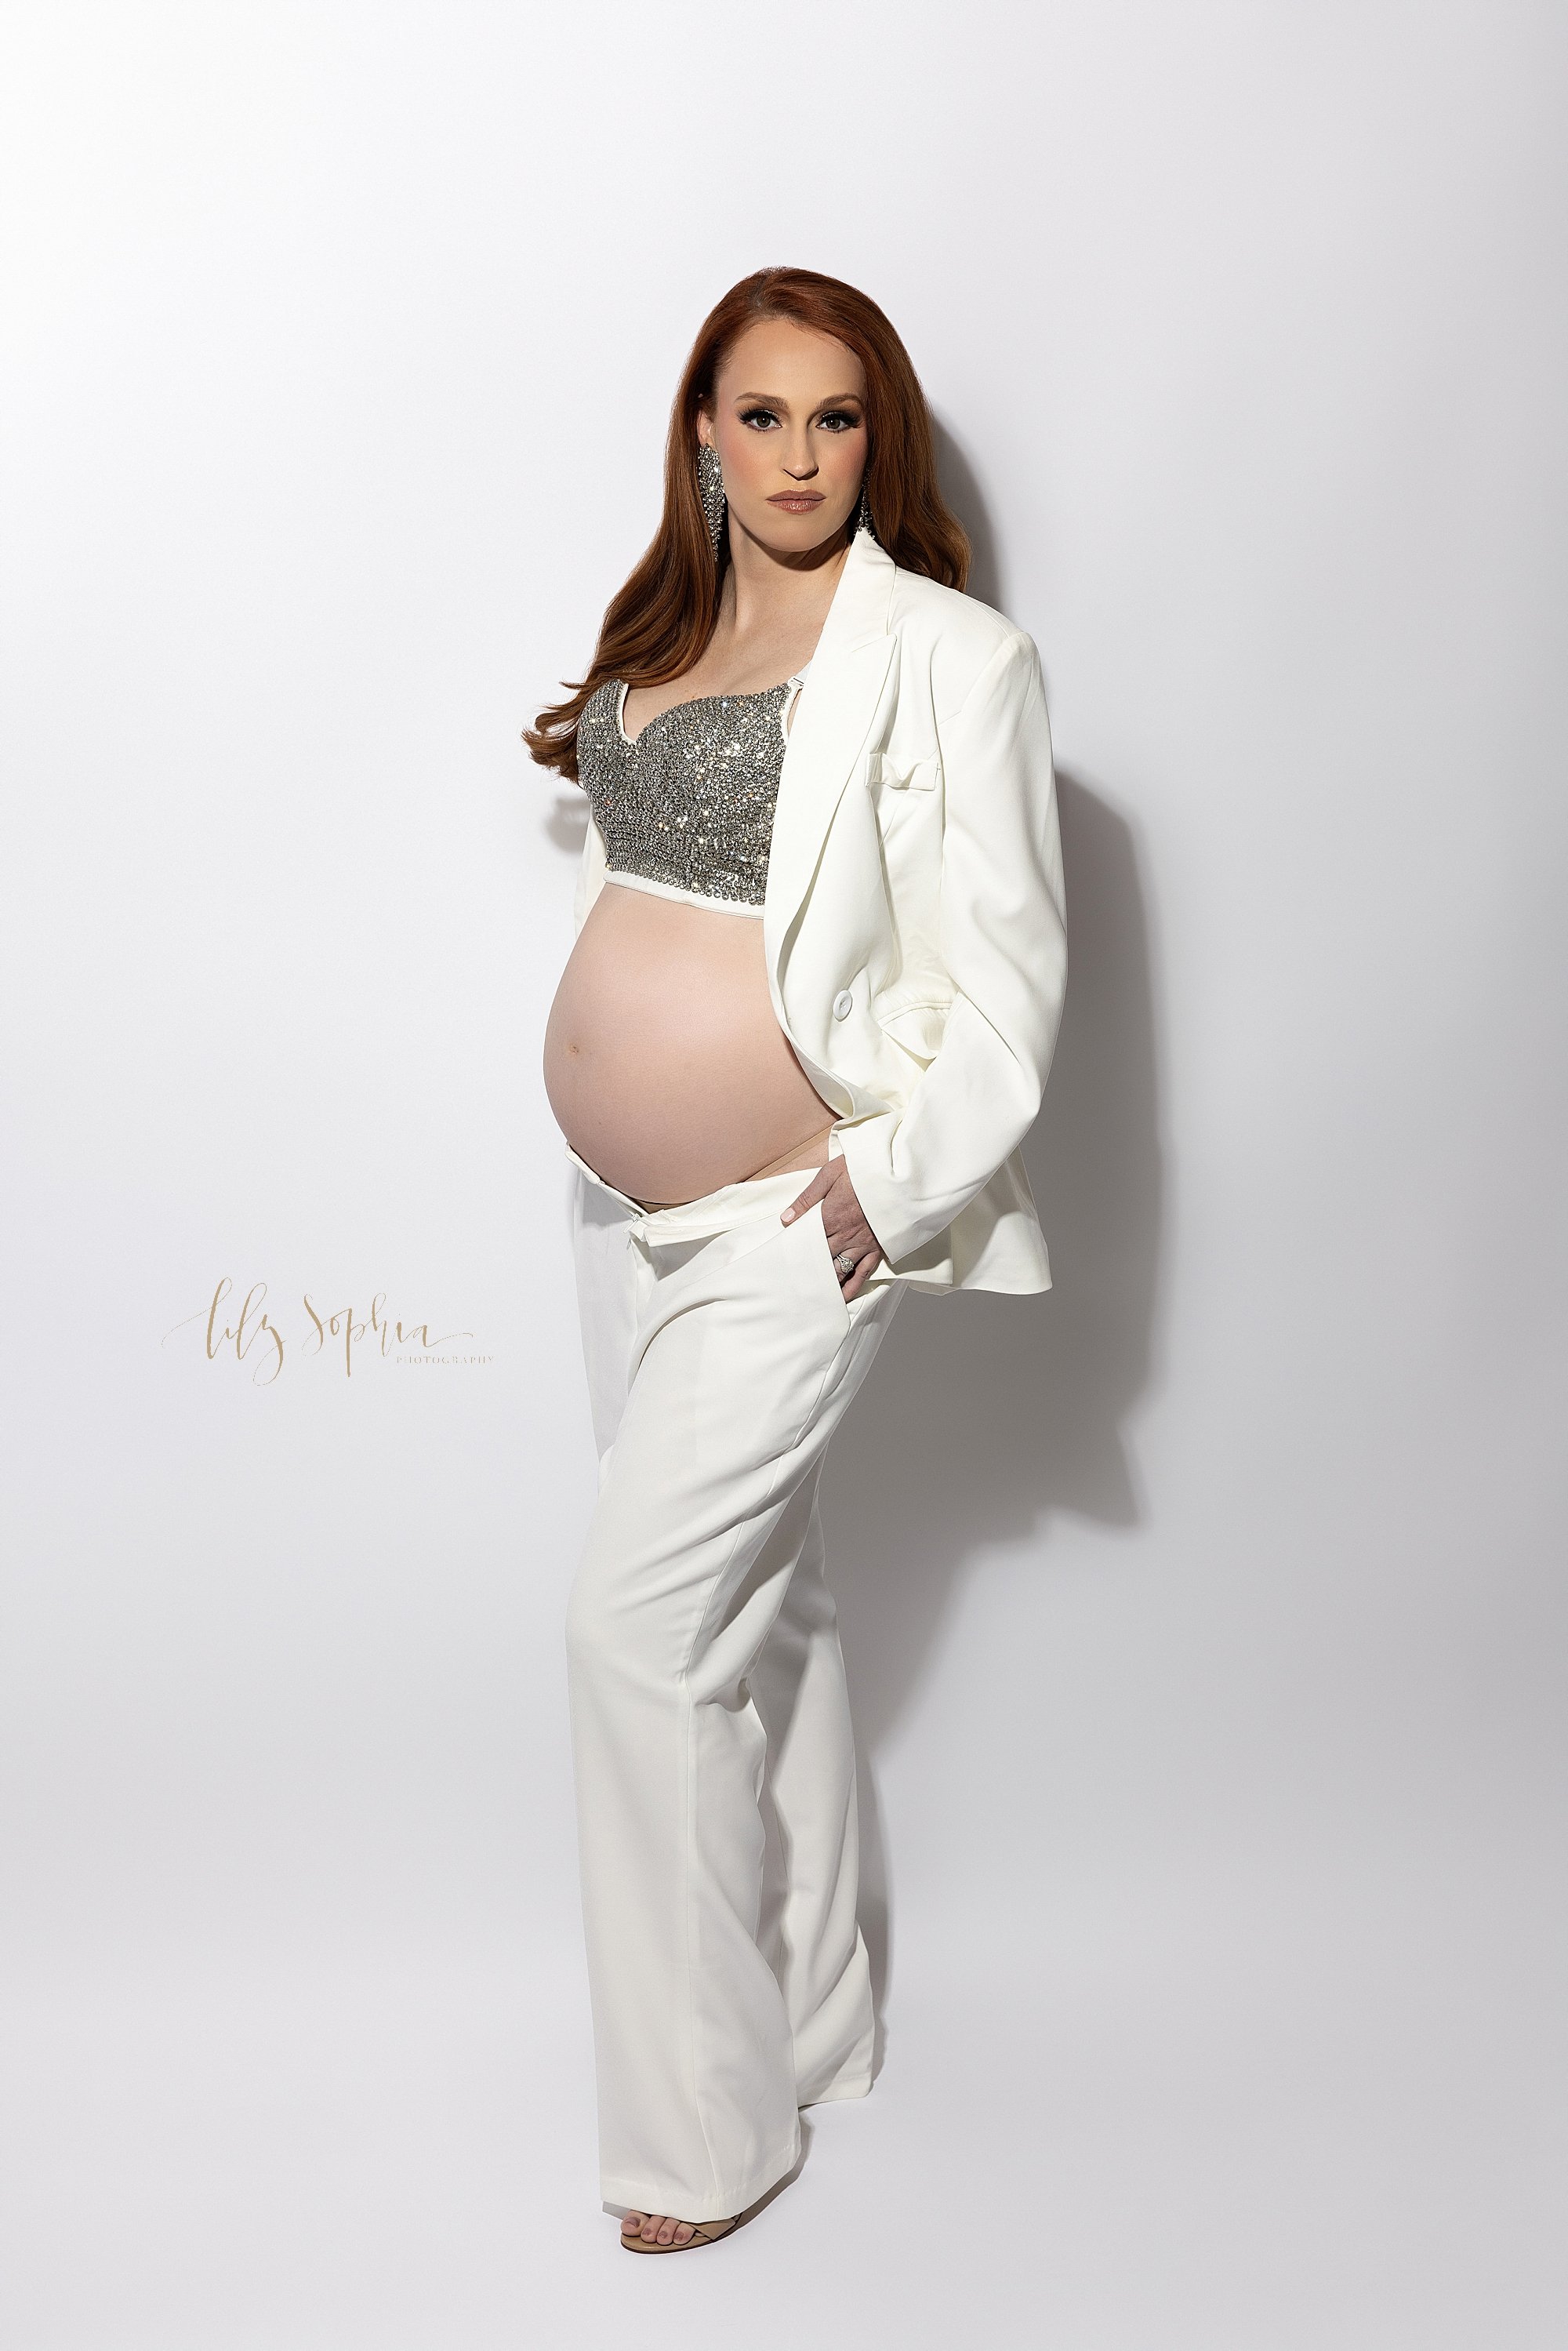  Modern maternity portrait with a red headed pregnant woman wearing a sequined bra and a white suit jacket with  white opened pants to show her bared belly as she places her hands in her pants pockets taken in a photography studio near Oakhurst in At